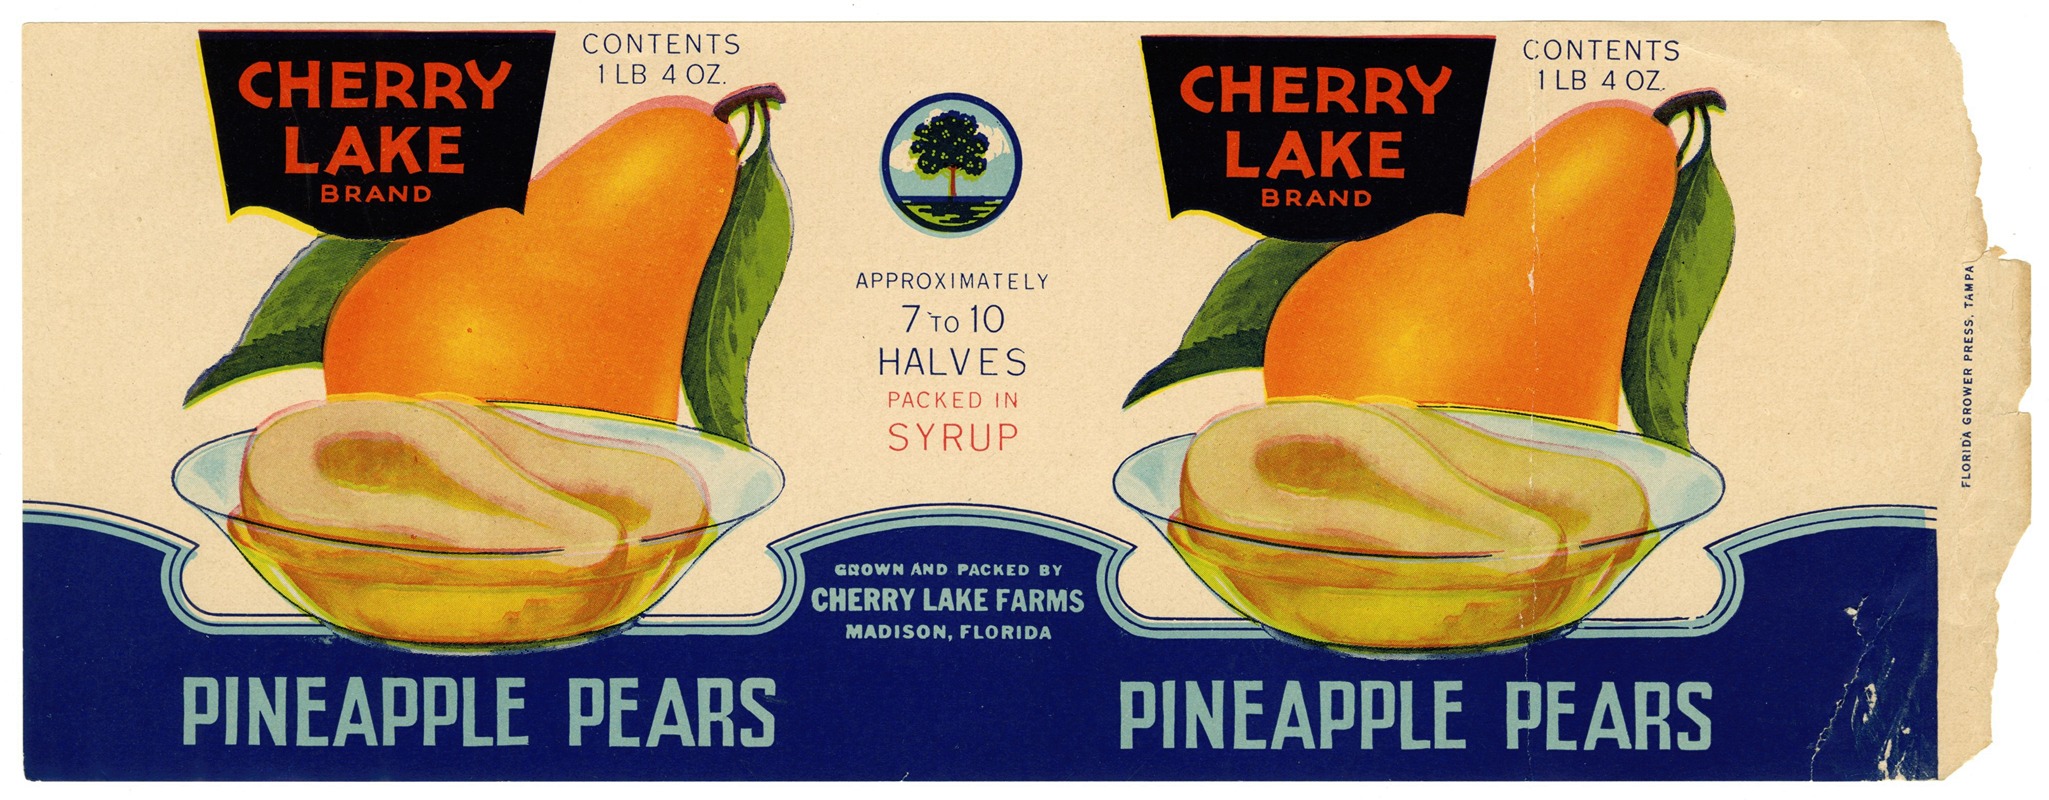 Anonymous - Cherry Lake Brand Pineapple Pears Label